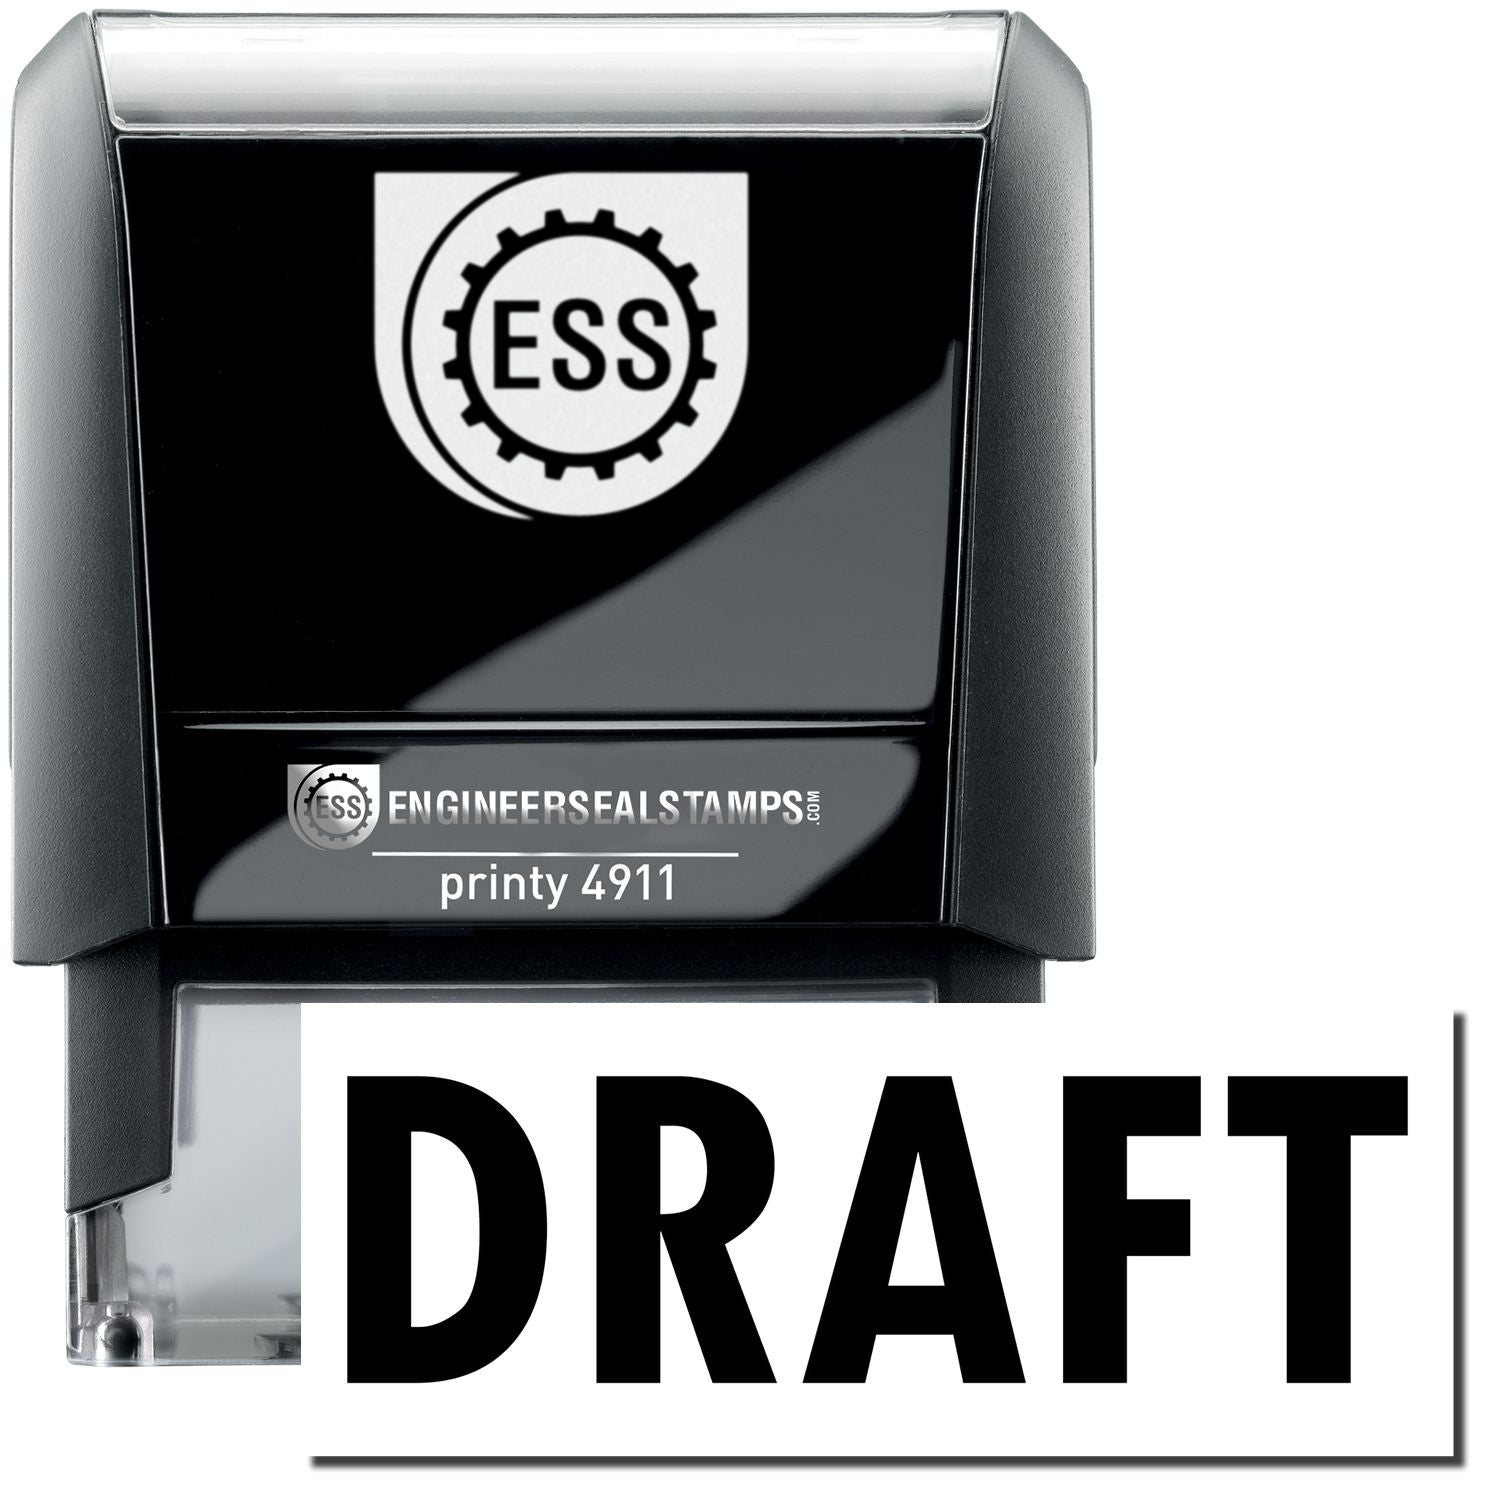 A self-inking stamp with a stamped image showing how the text "DRAFT" is displayed after stamping.